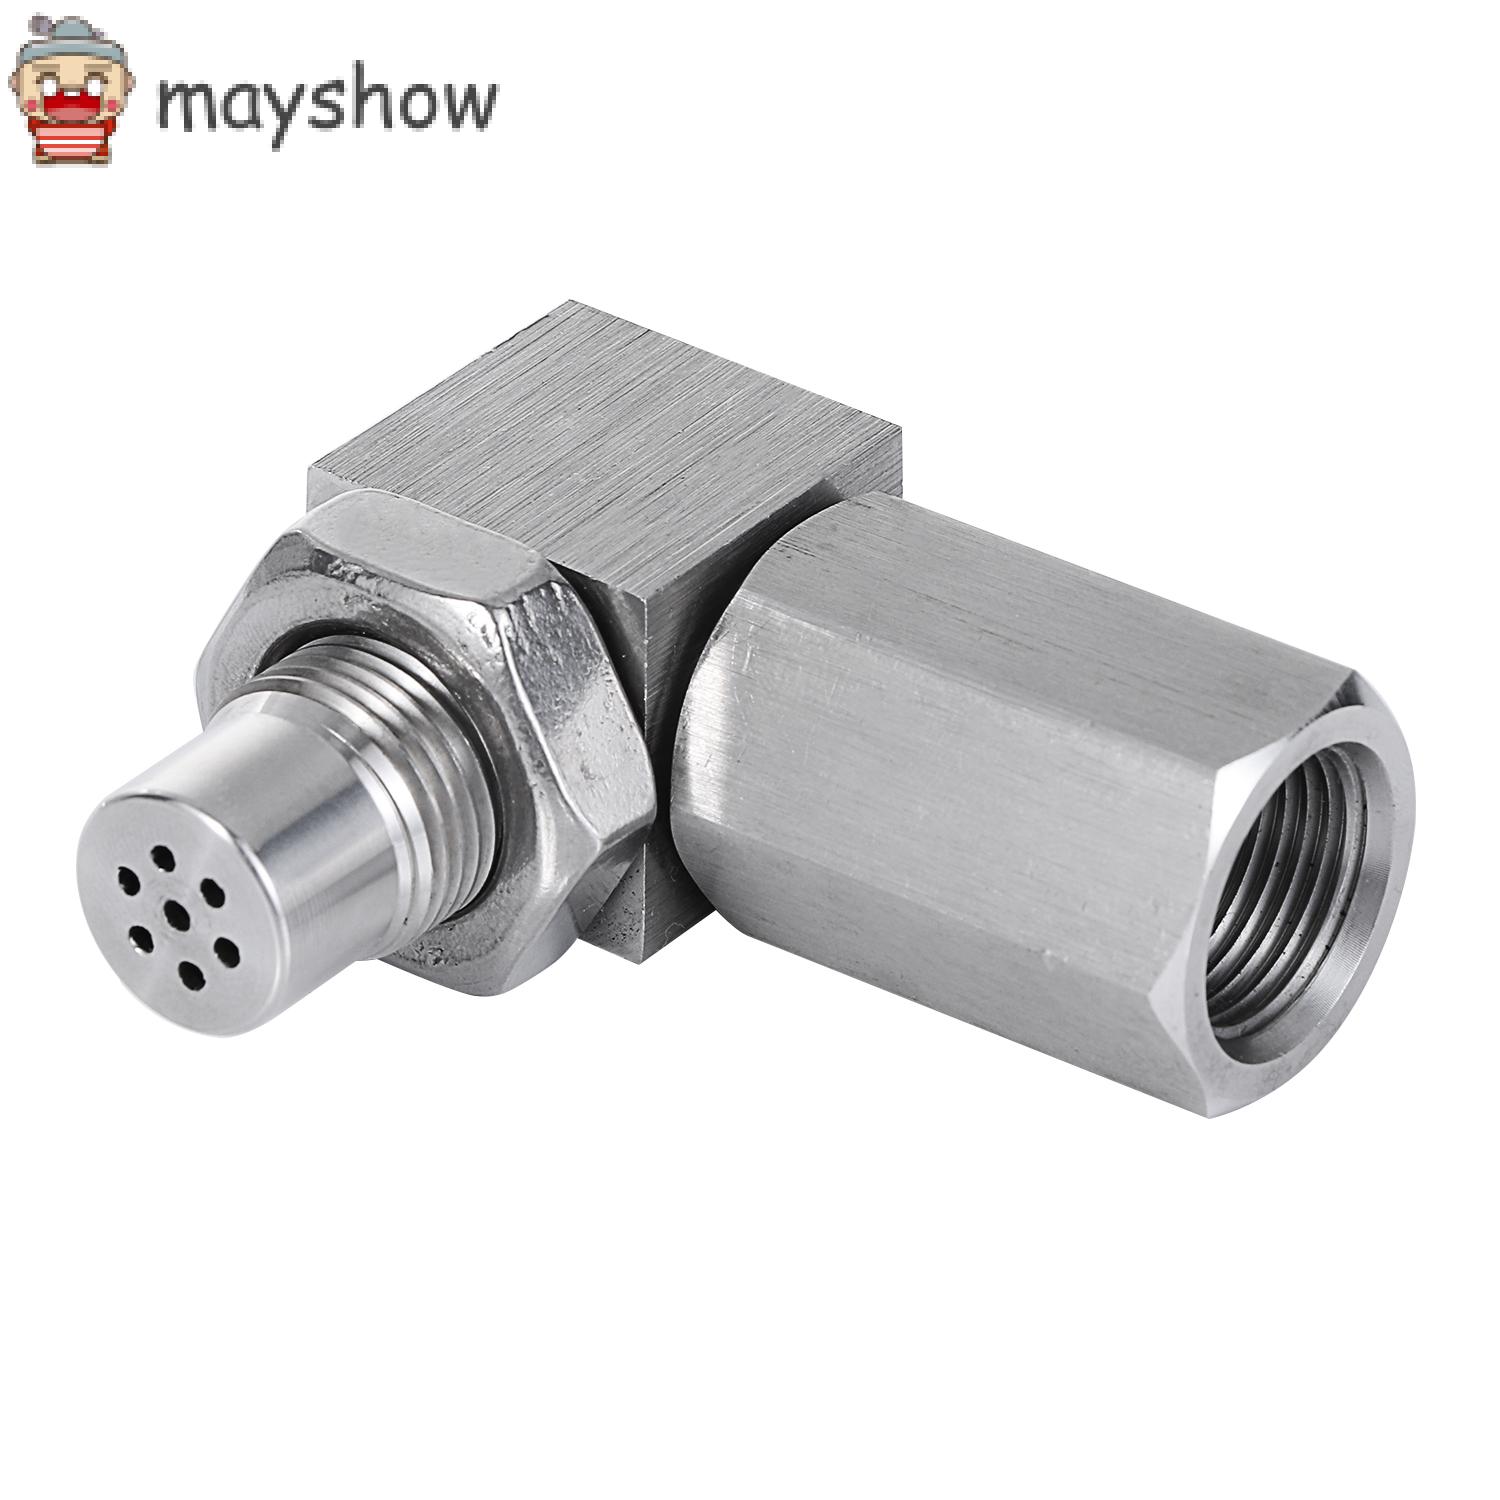 MAYSHOW Refit Sensor Automobile Extender Spacer Spark Plug Connector Extension Tube Degree Accessories Tool Adapter Sensor